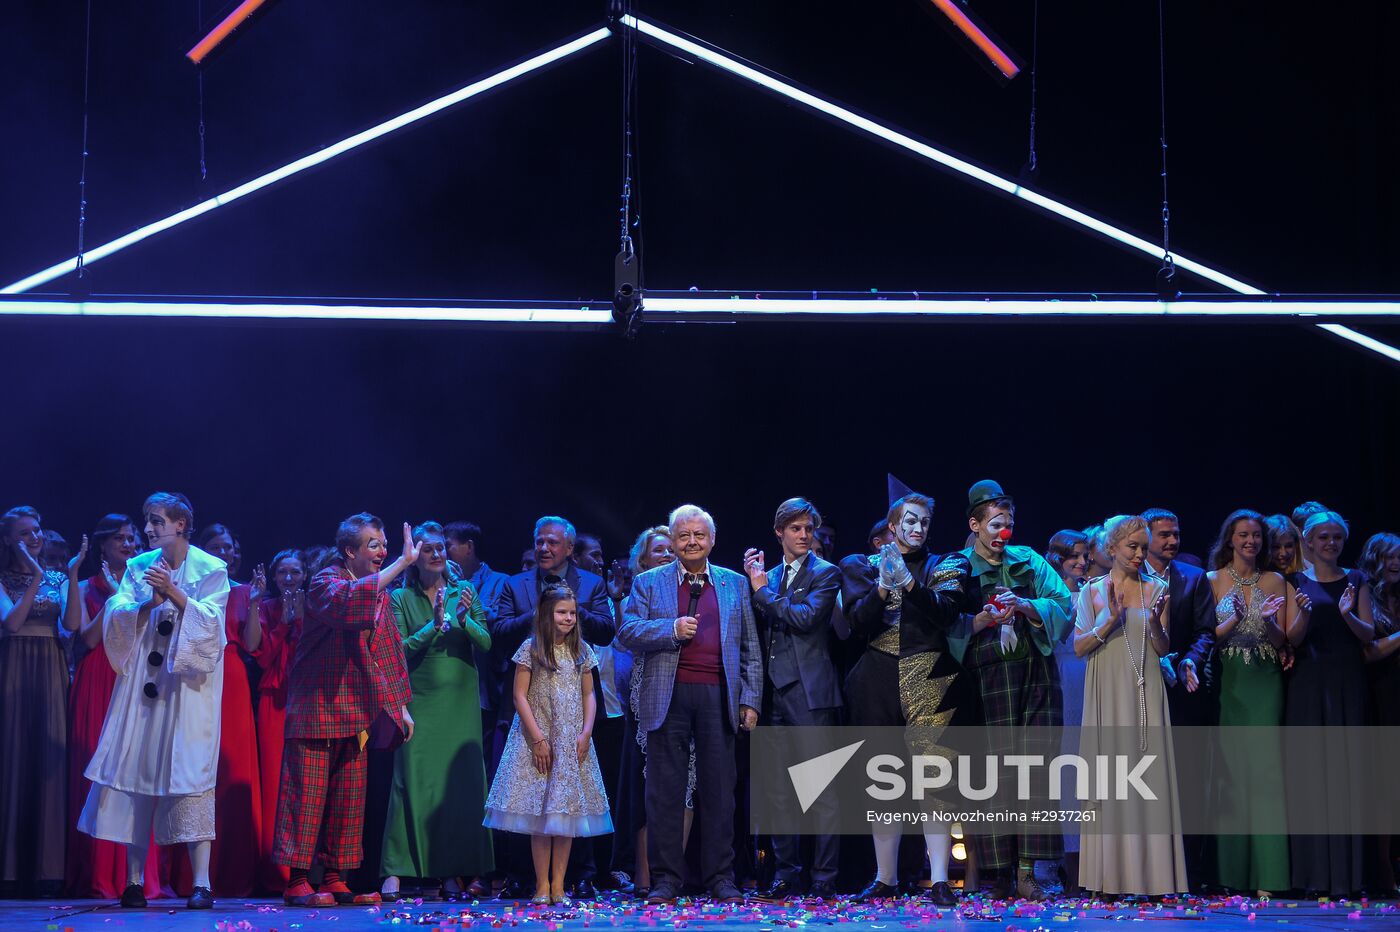 Oleg Tabakov Theater's new venue, Stage on Sukharevskaya, opens in Moscow